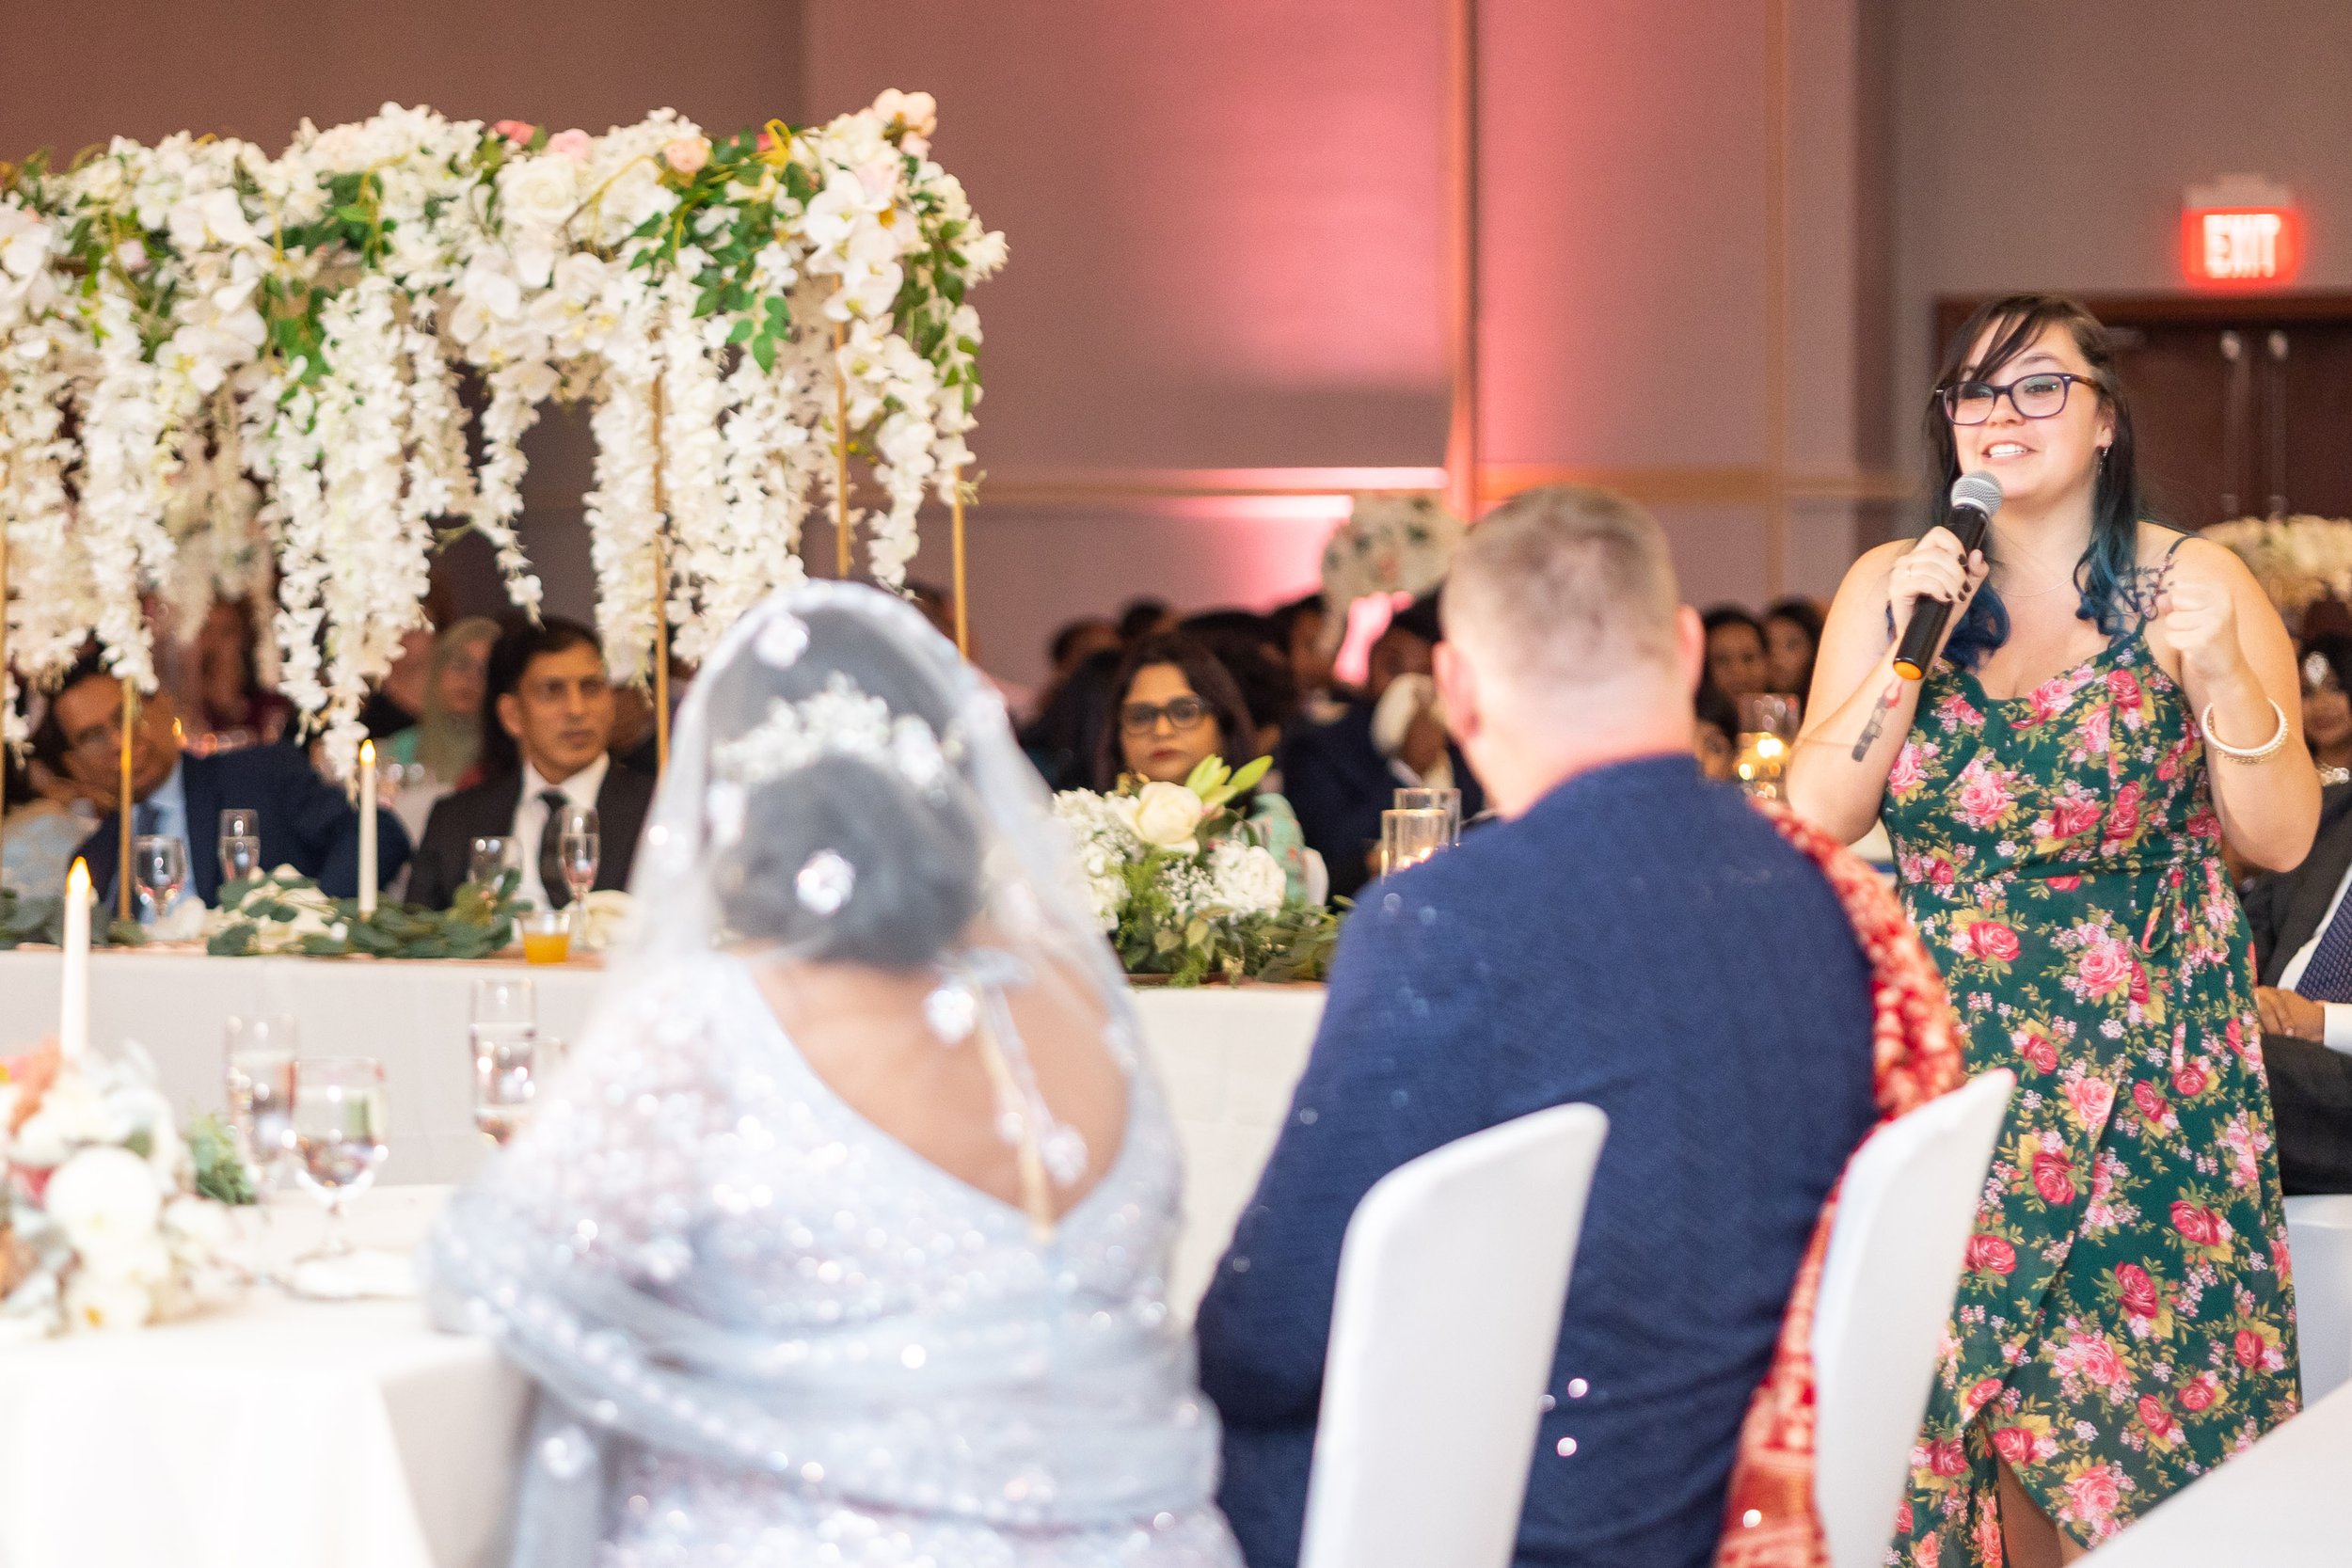 groom's sister gives speech during fun wedding reception